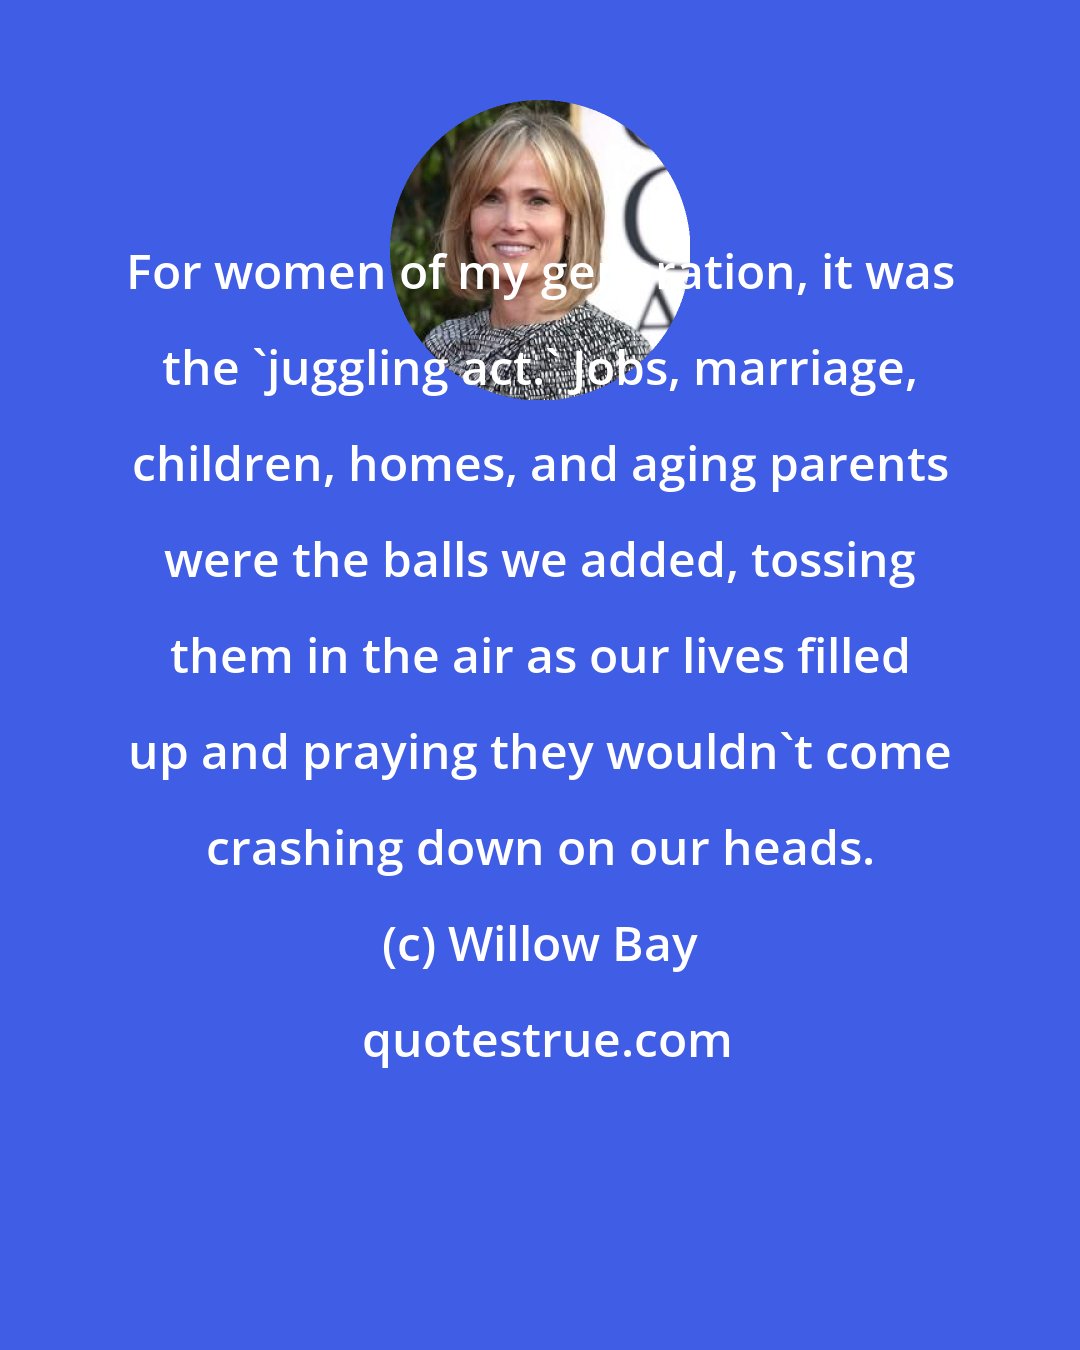 Willow Bay: For women of my generation, it was the 'juggling act.' Jobs, marriage, children, homes, and aging parents were the balls we added, tossing them in the air as our lives filled up and praying they wouldn't come crashing down on our heads.